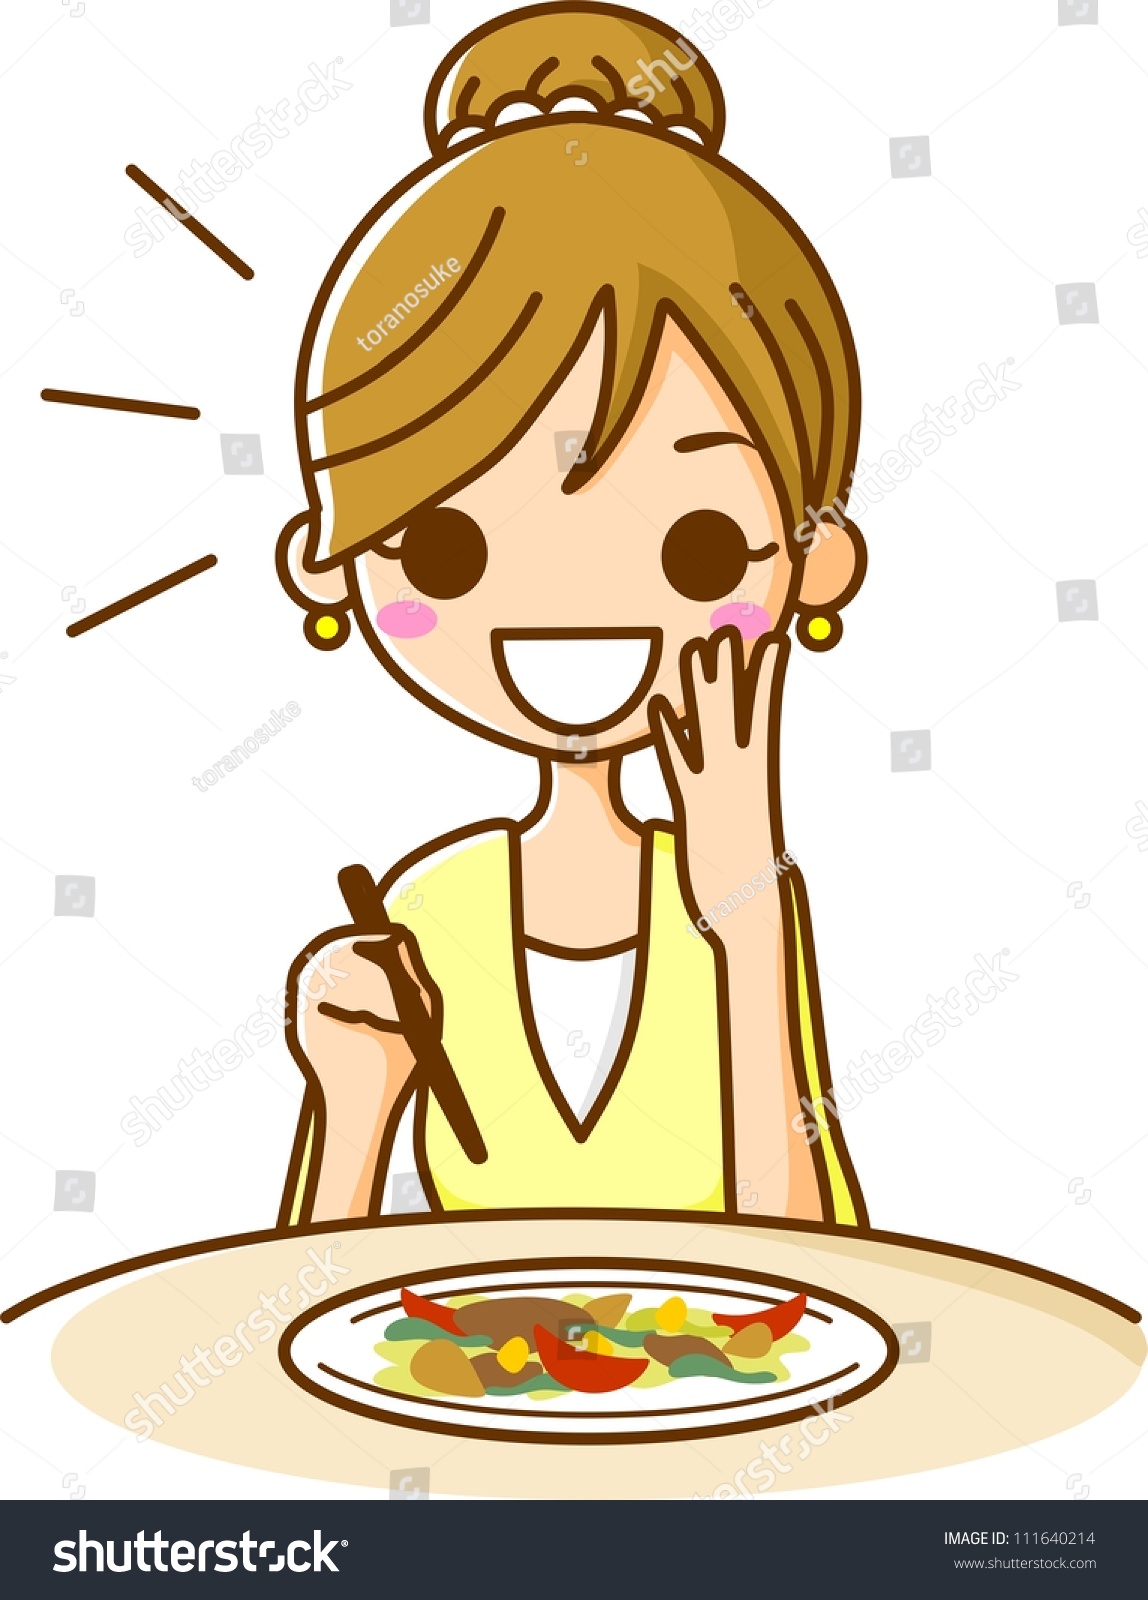 clipart of a girl eating - photo #48